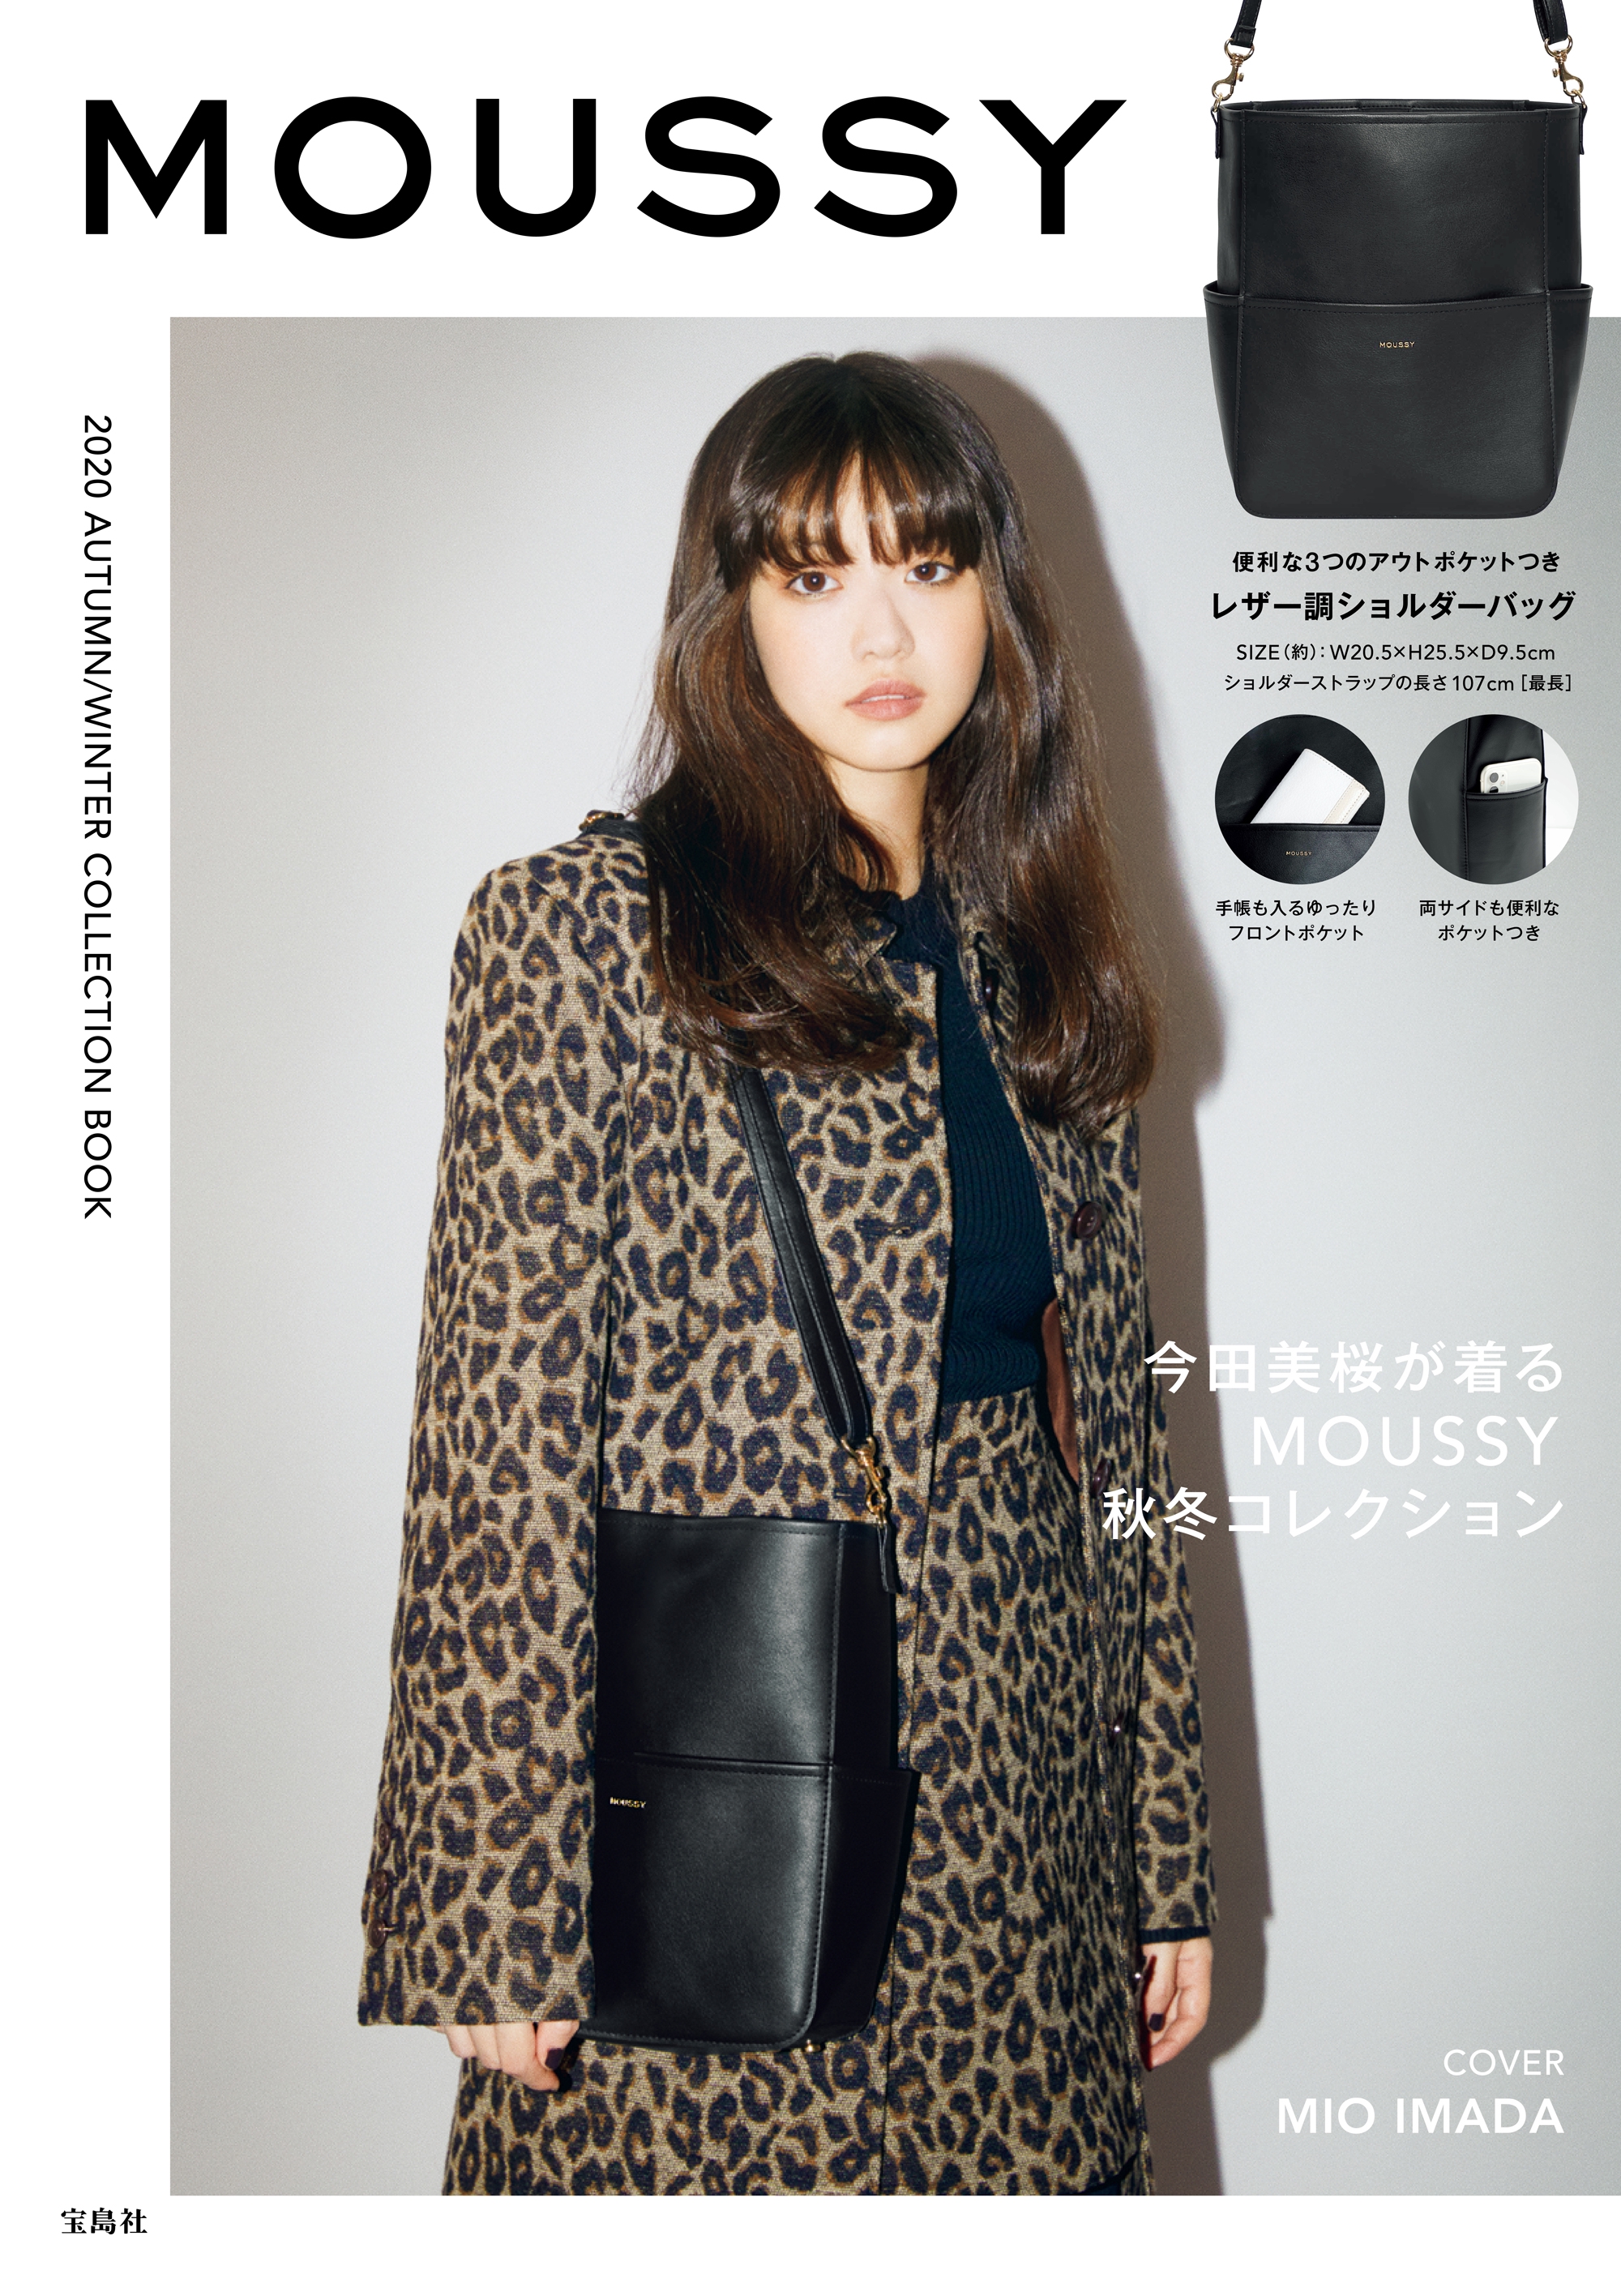 10/20(tue)発売】MOUSSY 2020 AUTUMN/WINTER COLLECTION BOOK | MOUSSY